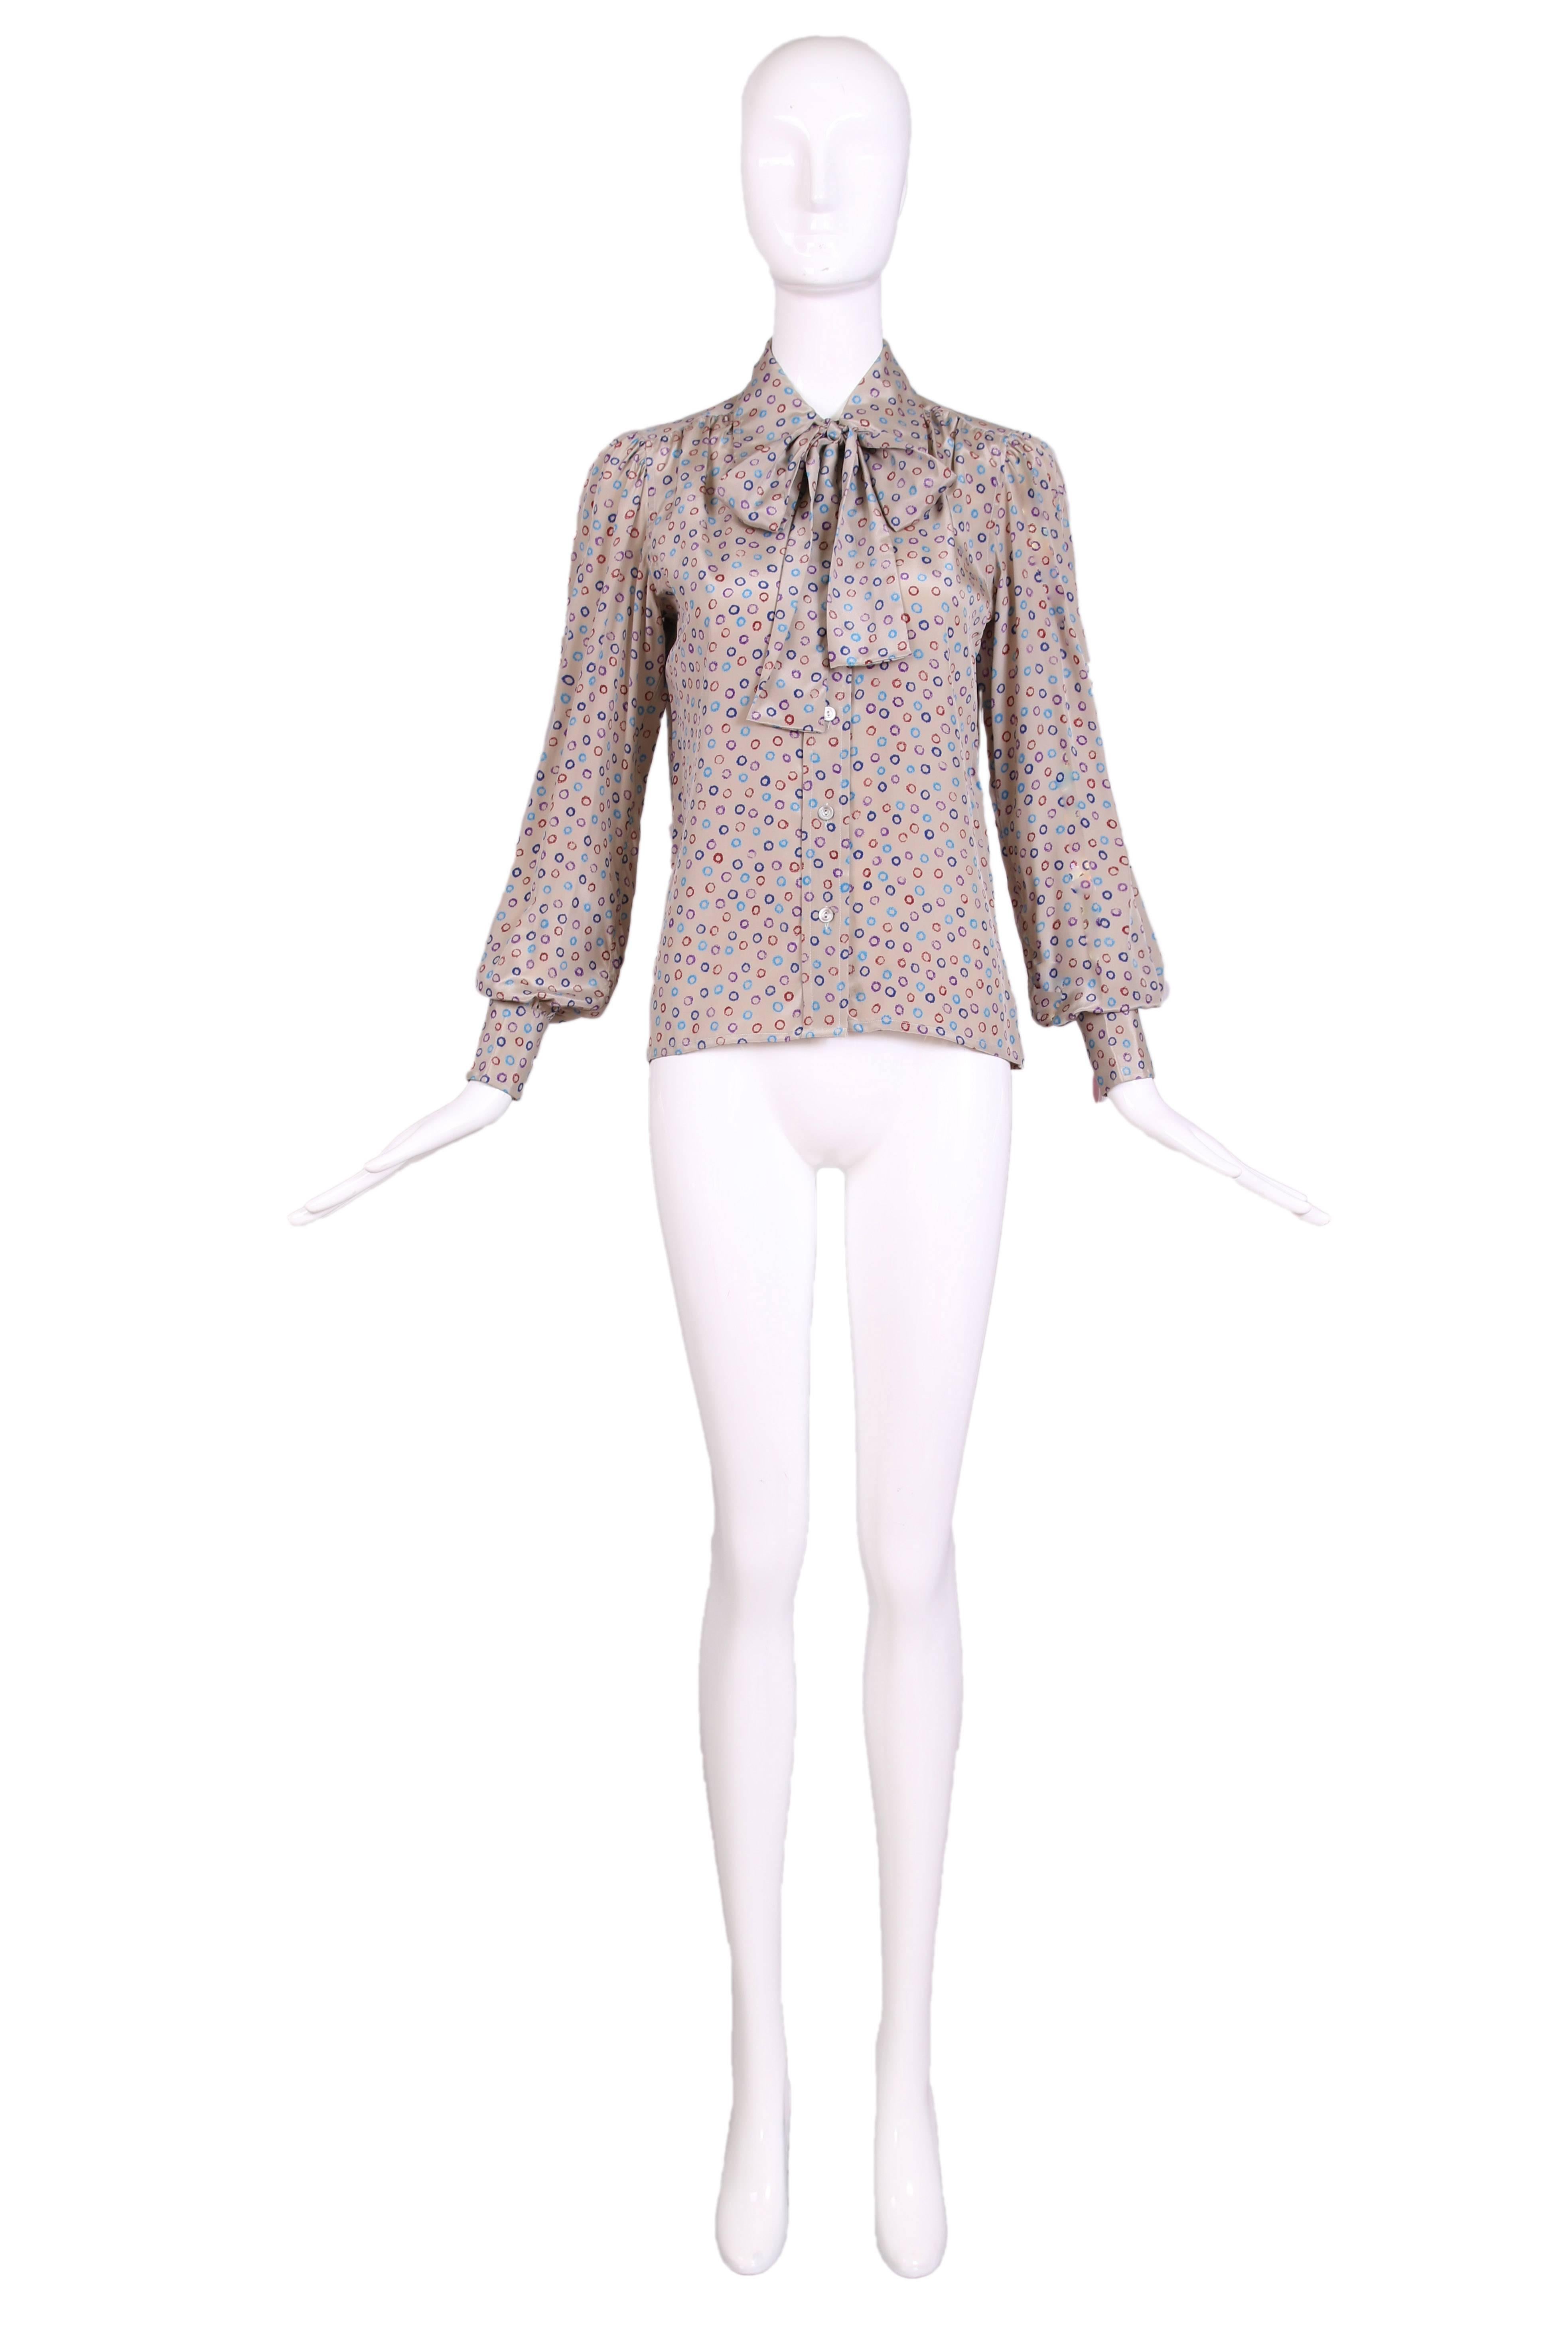 1970's Yves Saint Laurent silk blouse with pale gray background with multi-colored circle print . Features pussy blow, button closures up the front. In excellent condition with two small marks on one sleeve. Seize 38.
MEASUREMENTS:
Bust -